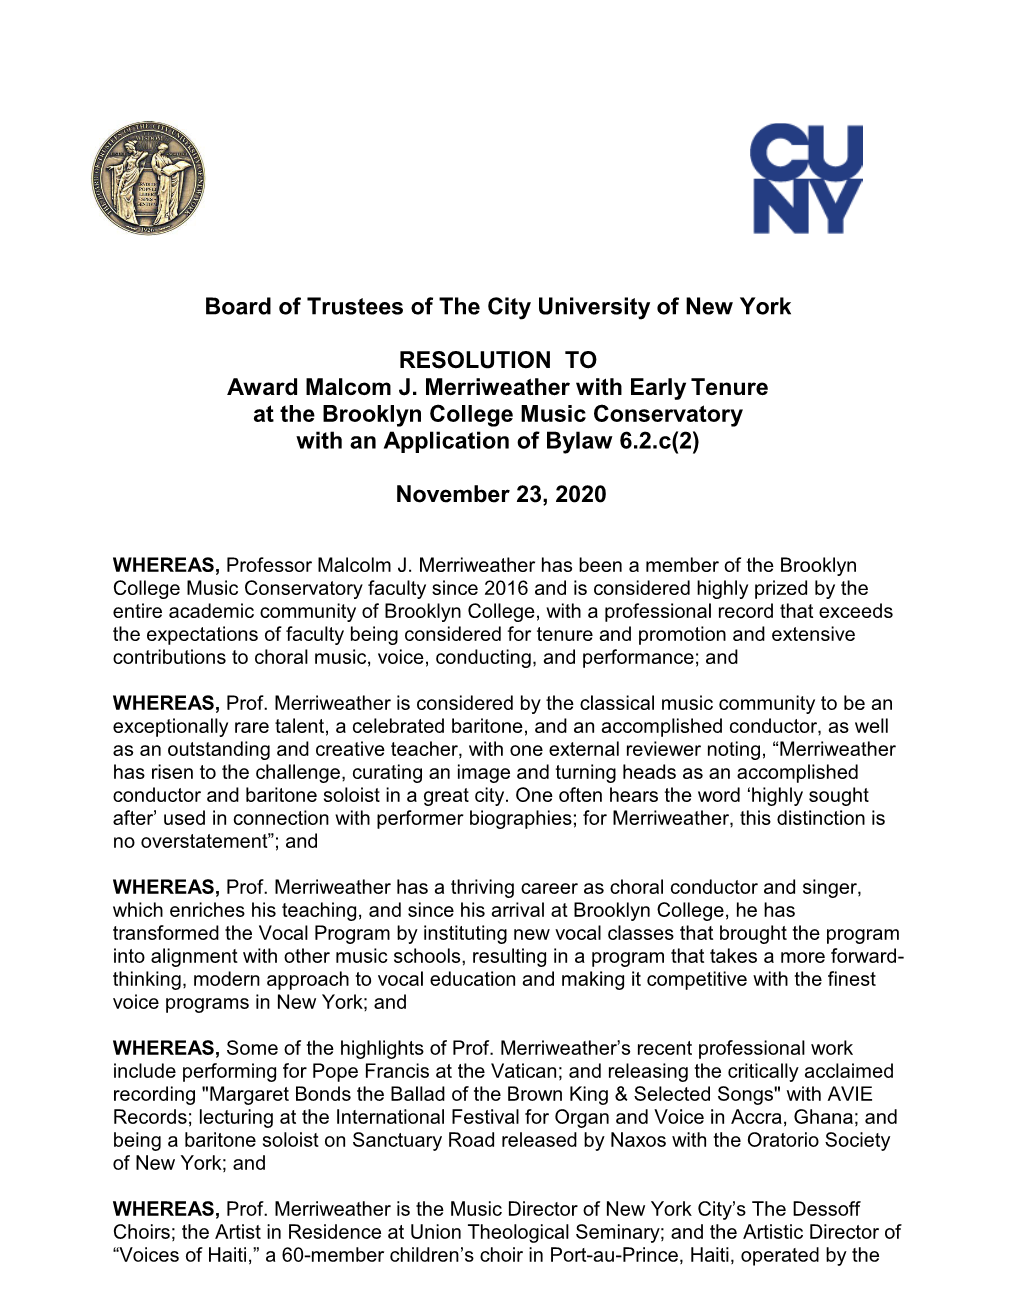 Board of Trustees of the City University of New York